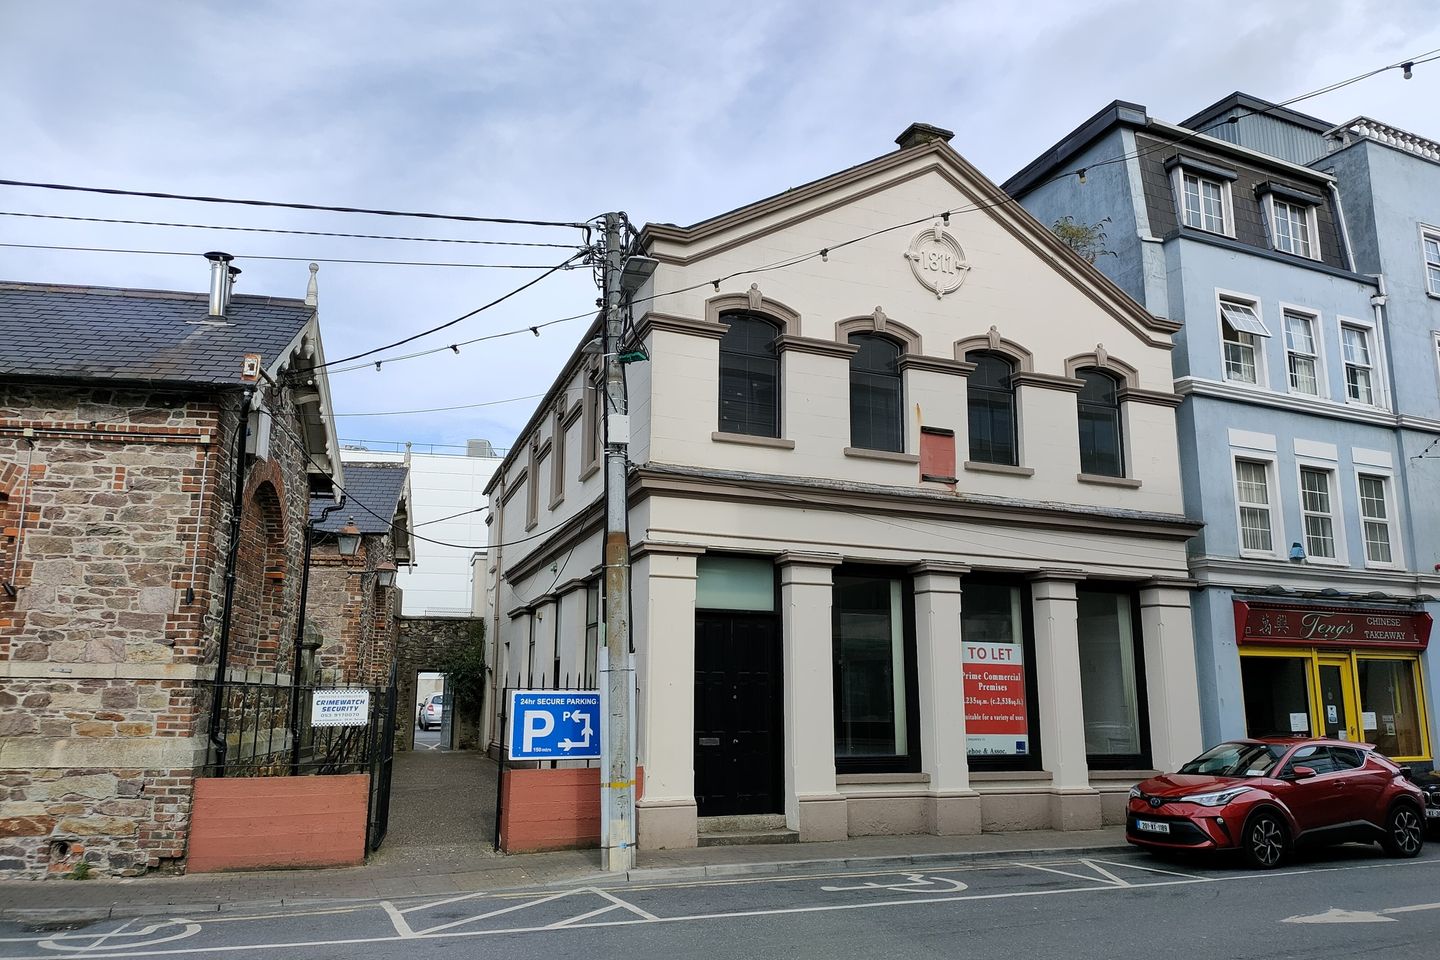 Retail with Office Overhead at Common Quay Street, Wexford Town, Co. Wexford